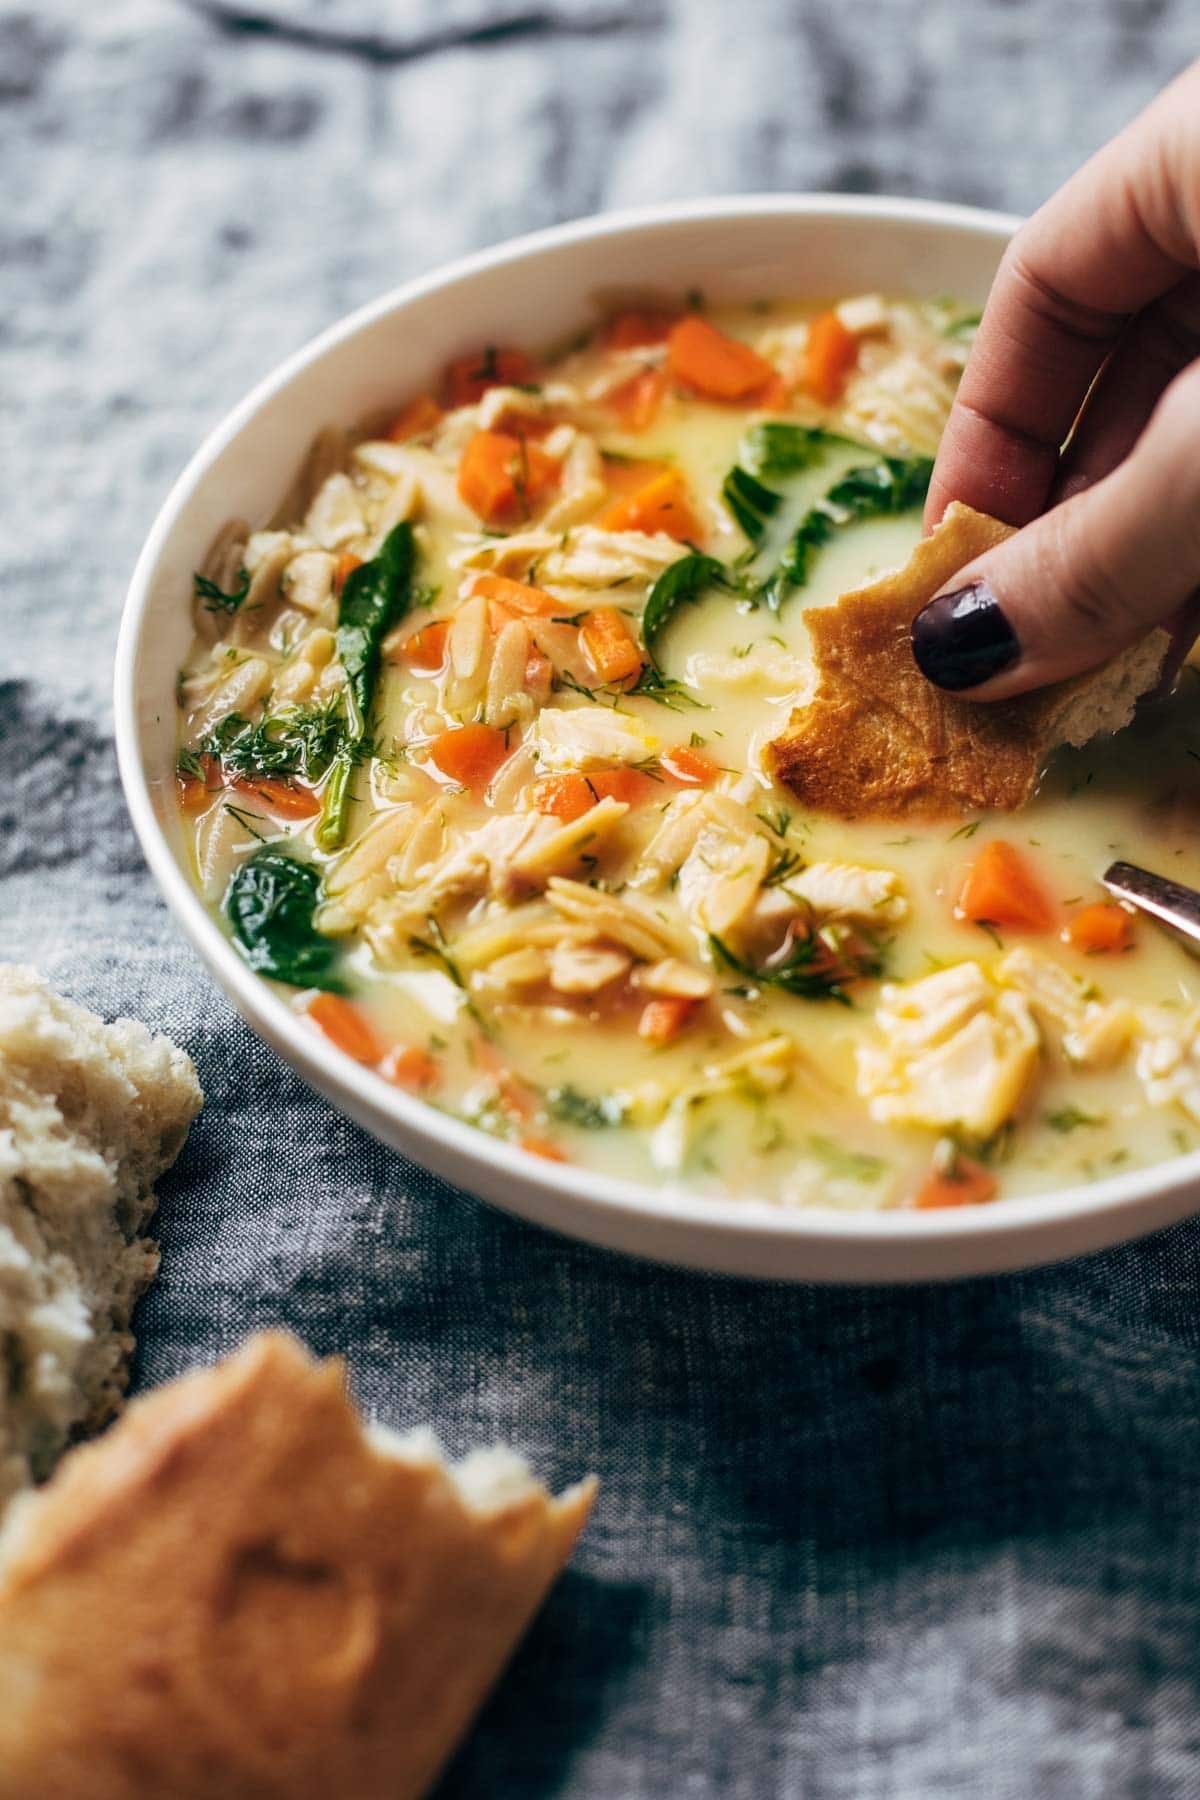 Lemon chicken soup with orzo